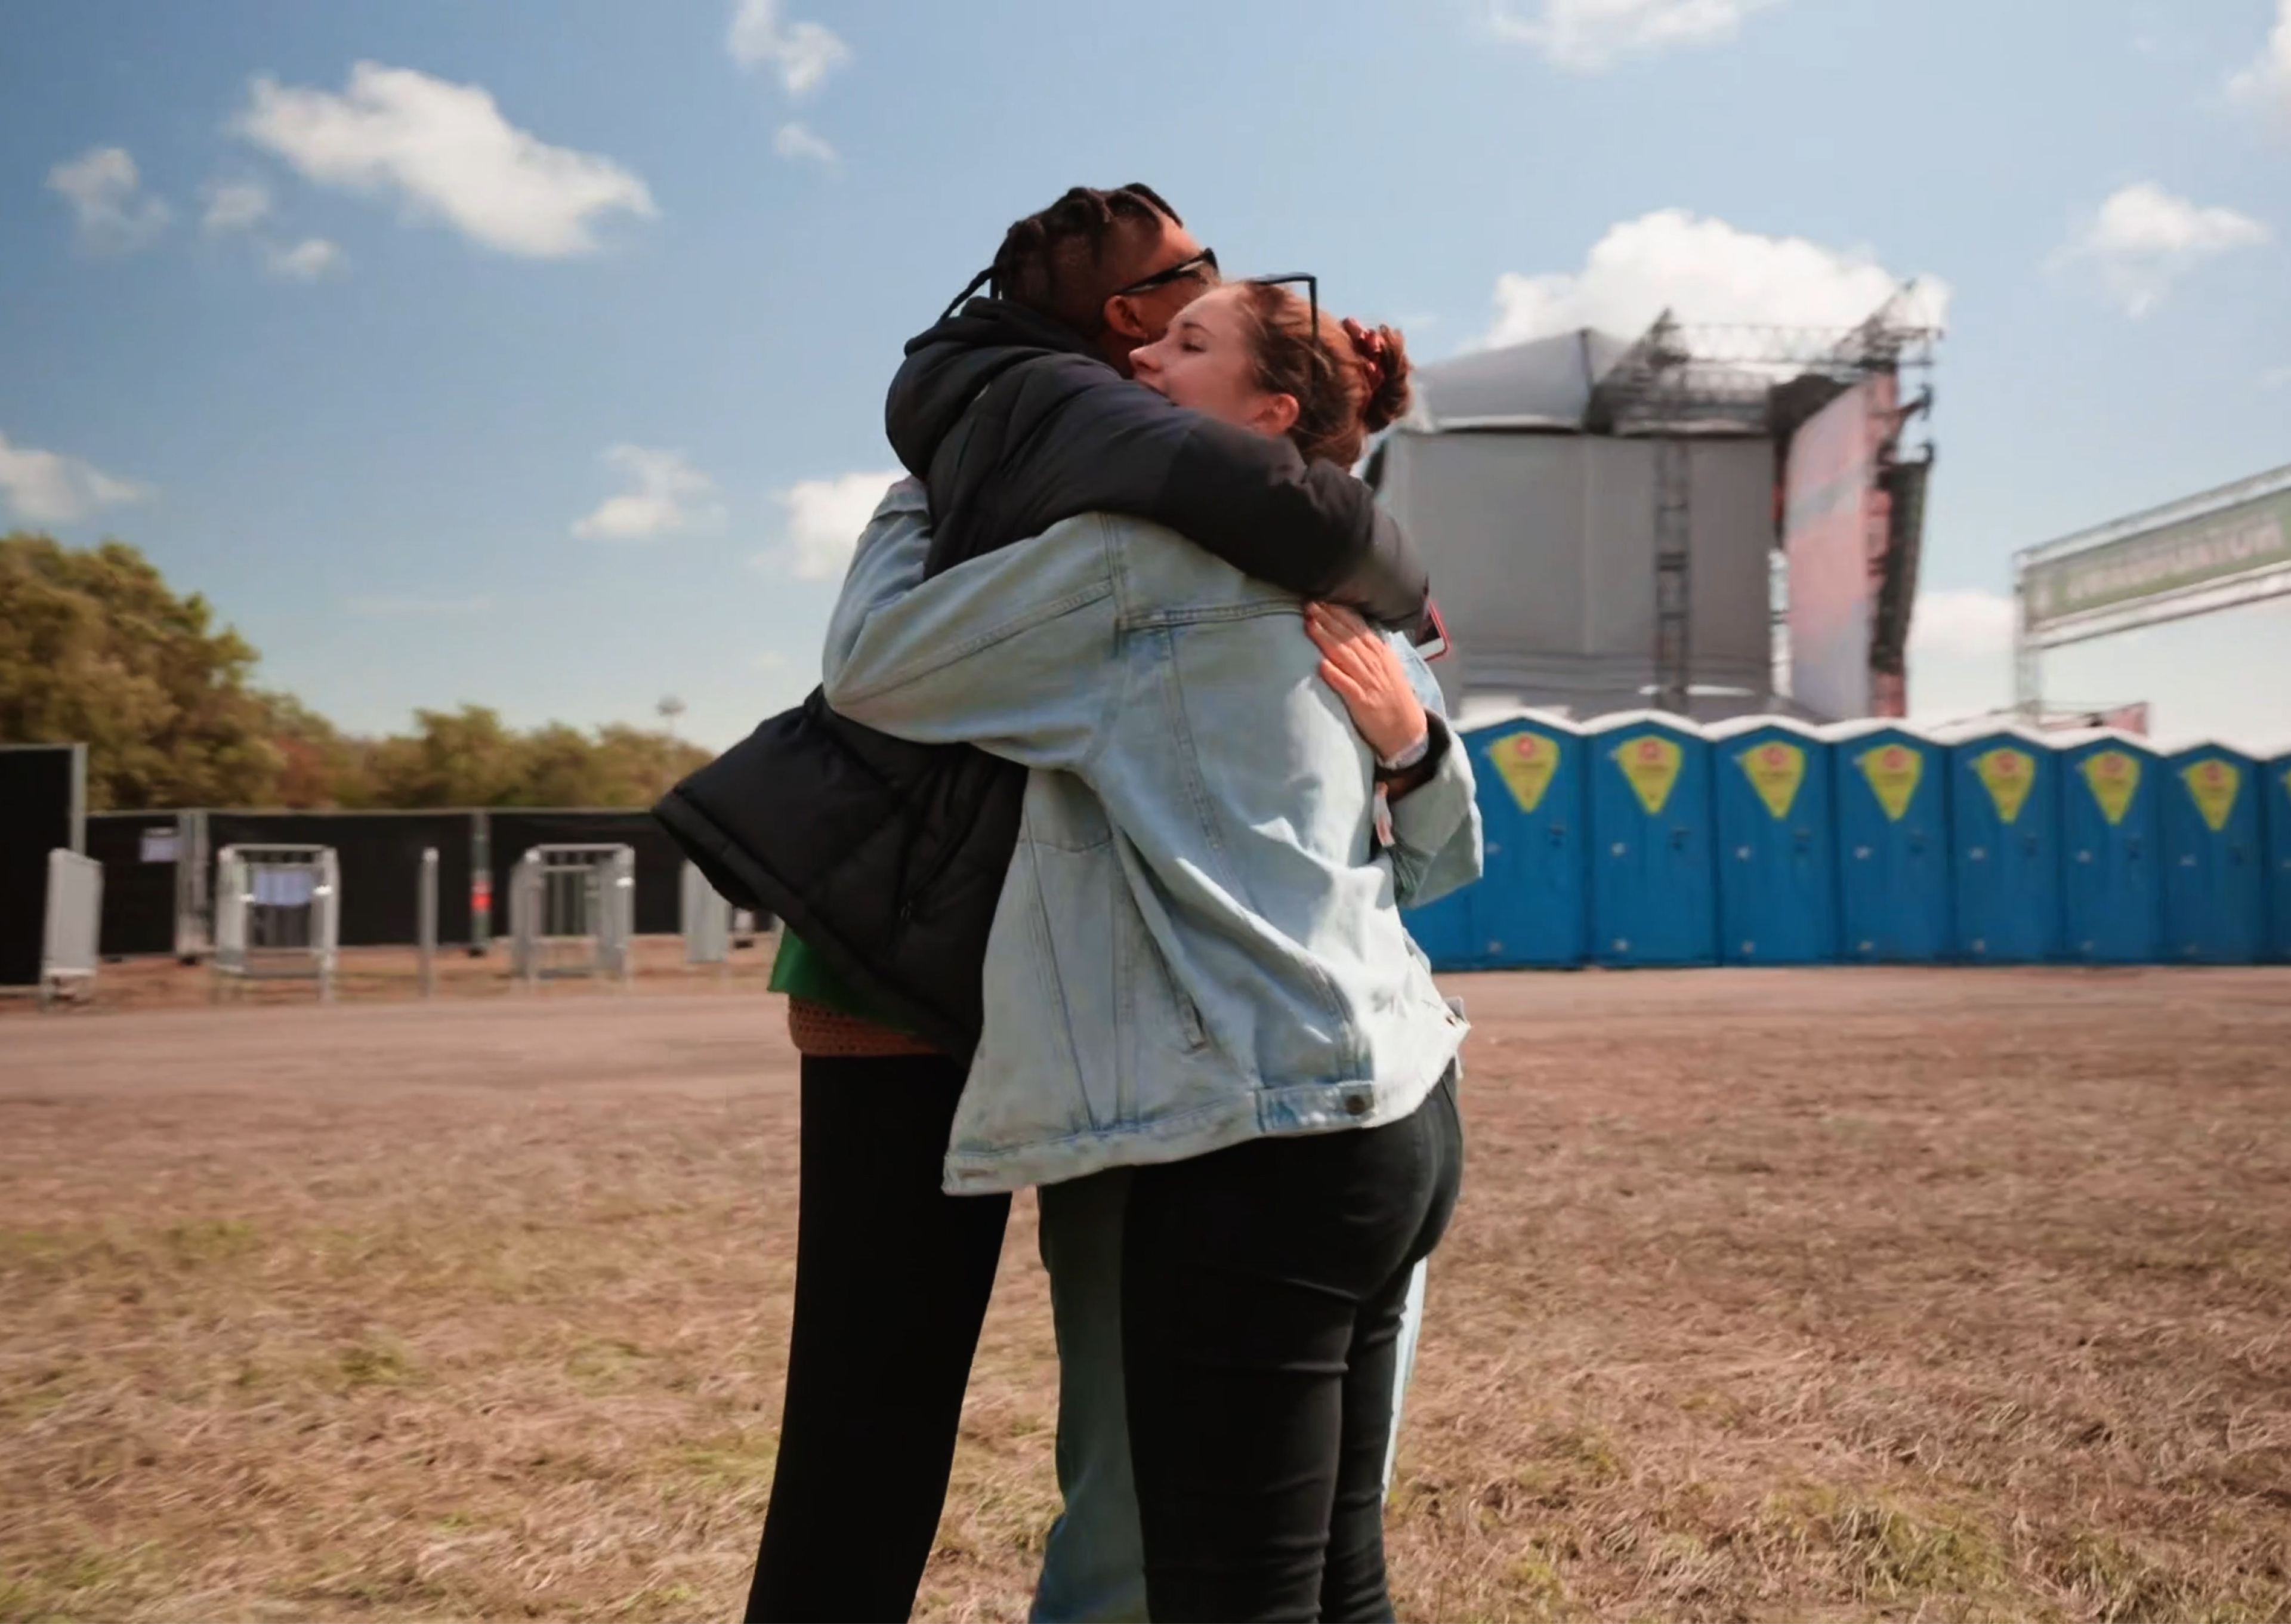 Two people hug at festival